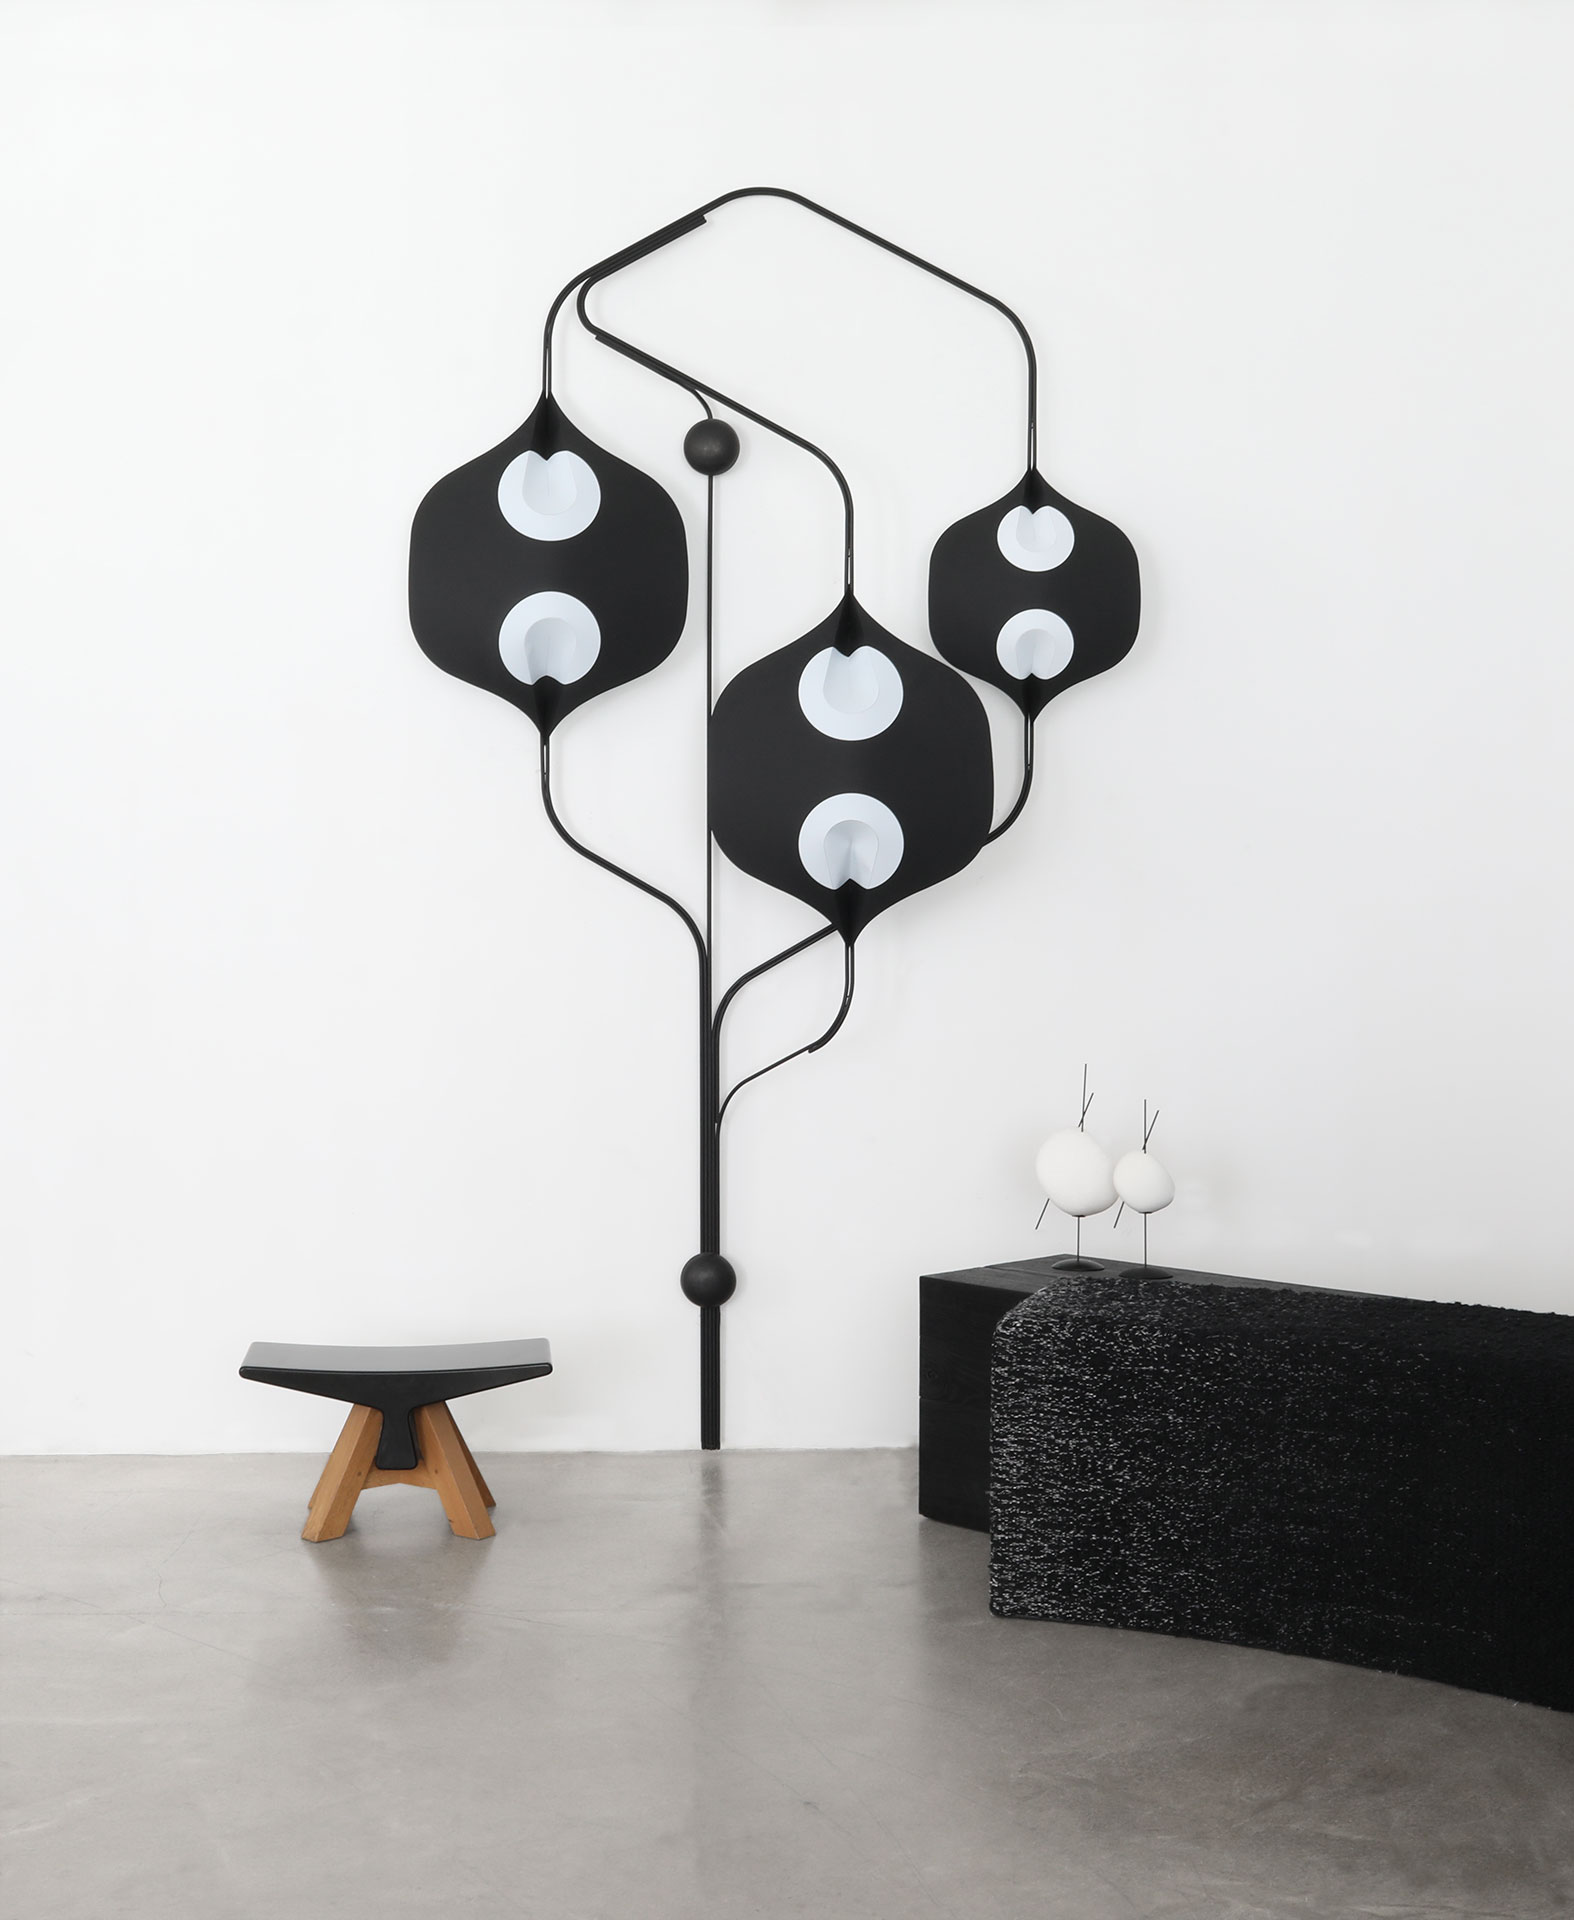 PIECES IN SITU STOOL BONE BLACK BELGIAN MARBLE BASE IN NATURAL OAK SCONCE EDALIGHT PAPER CONCRETE METAL BENCH BOIS BRULE AUBUSSON TAPESTRY AND WOOD BATTERY CHARGED LAMP CERAMIC